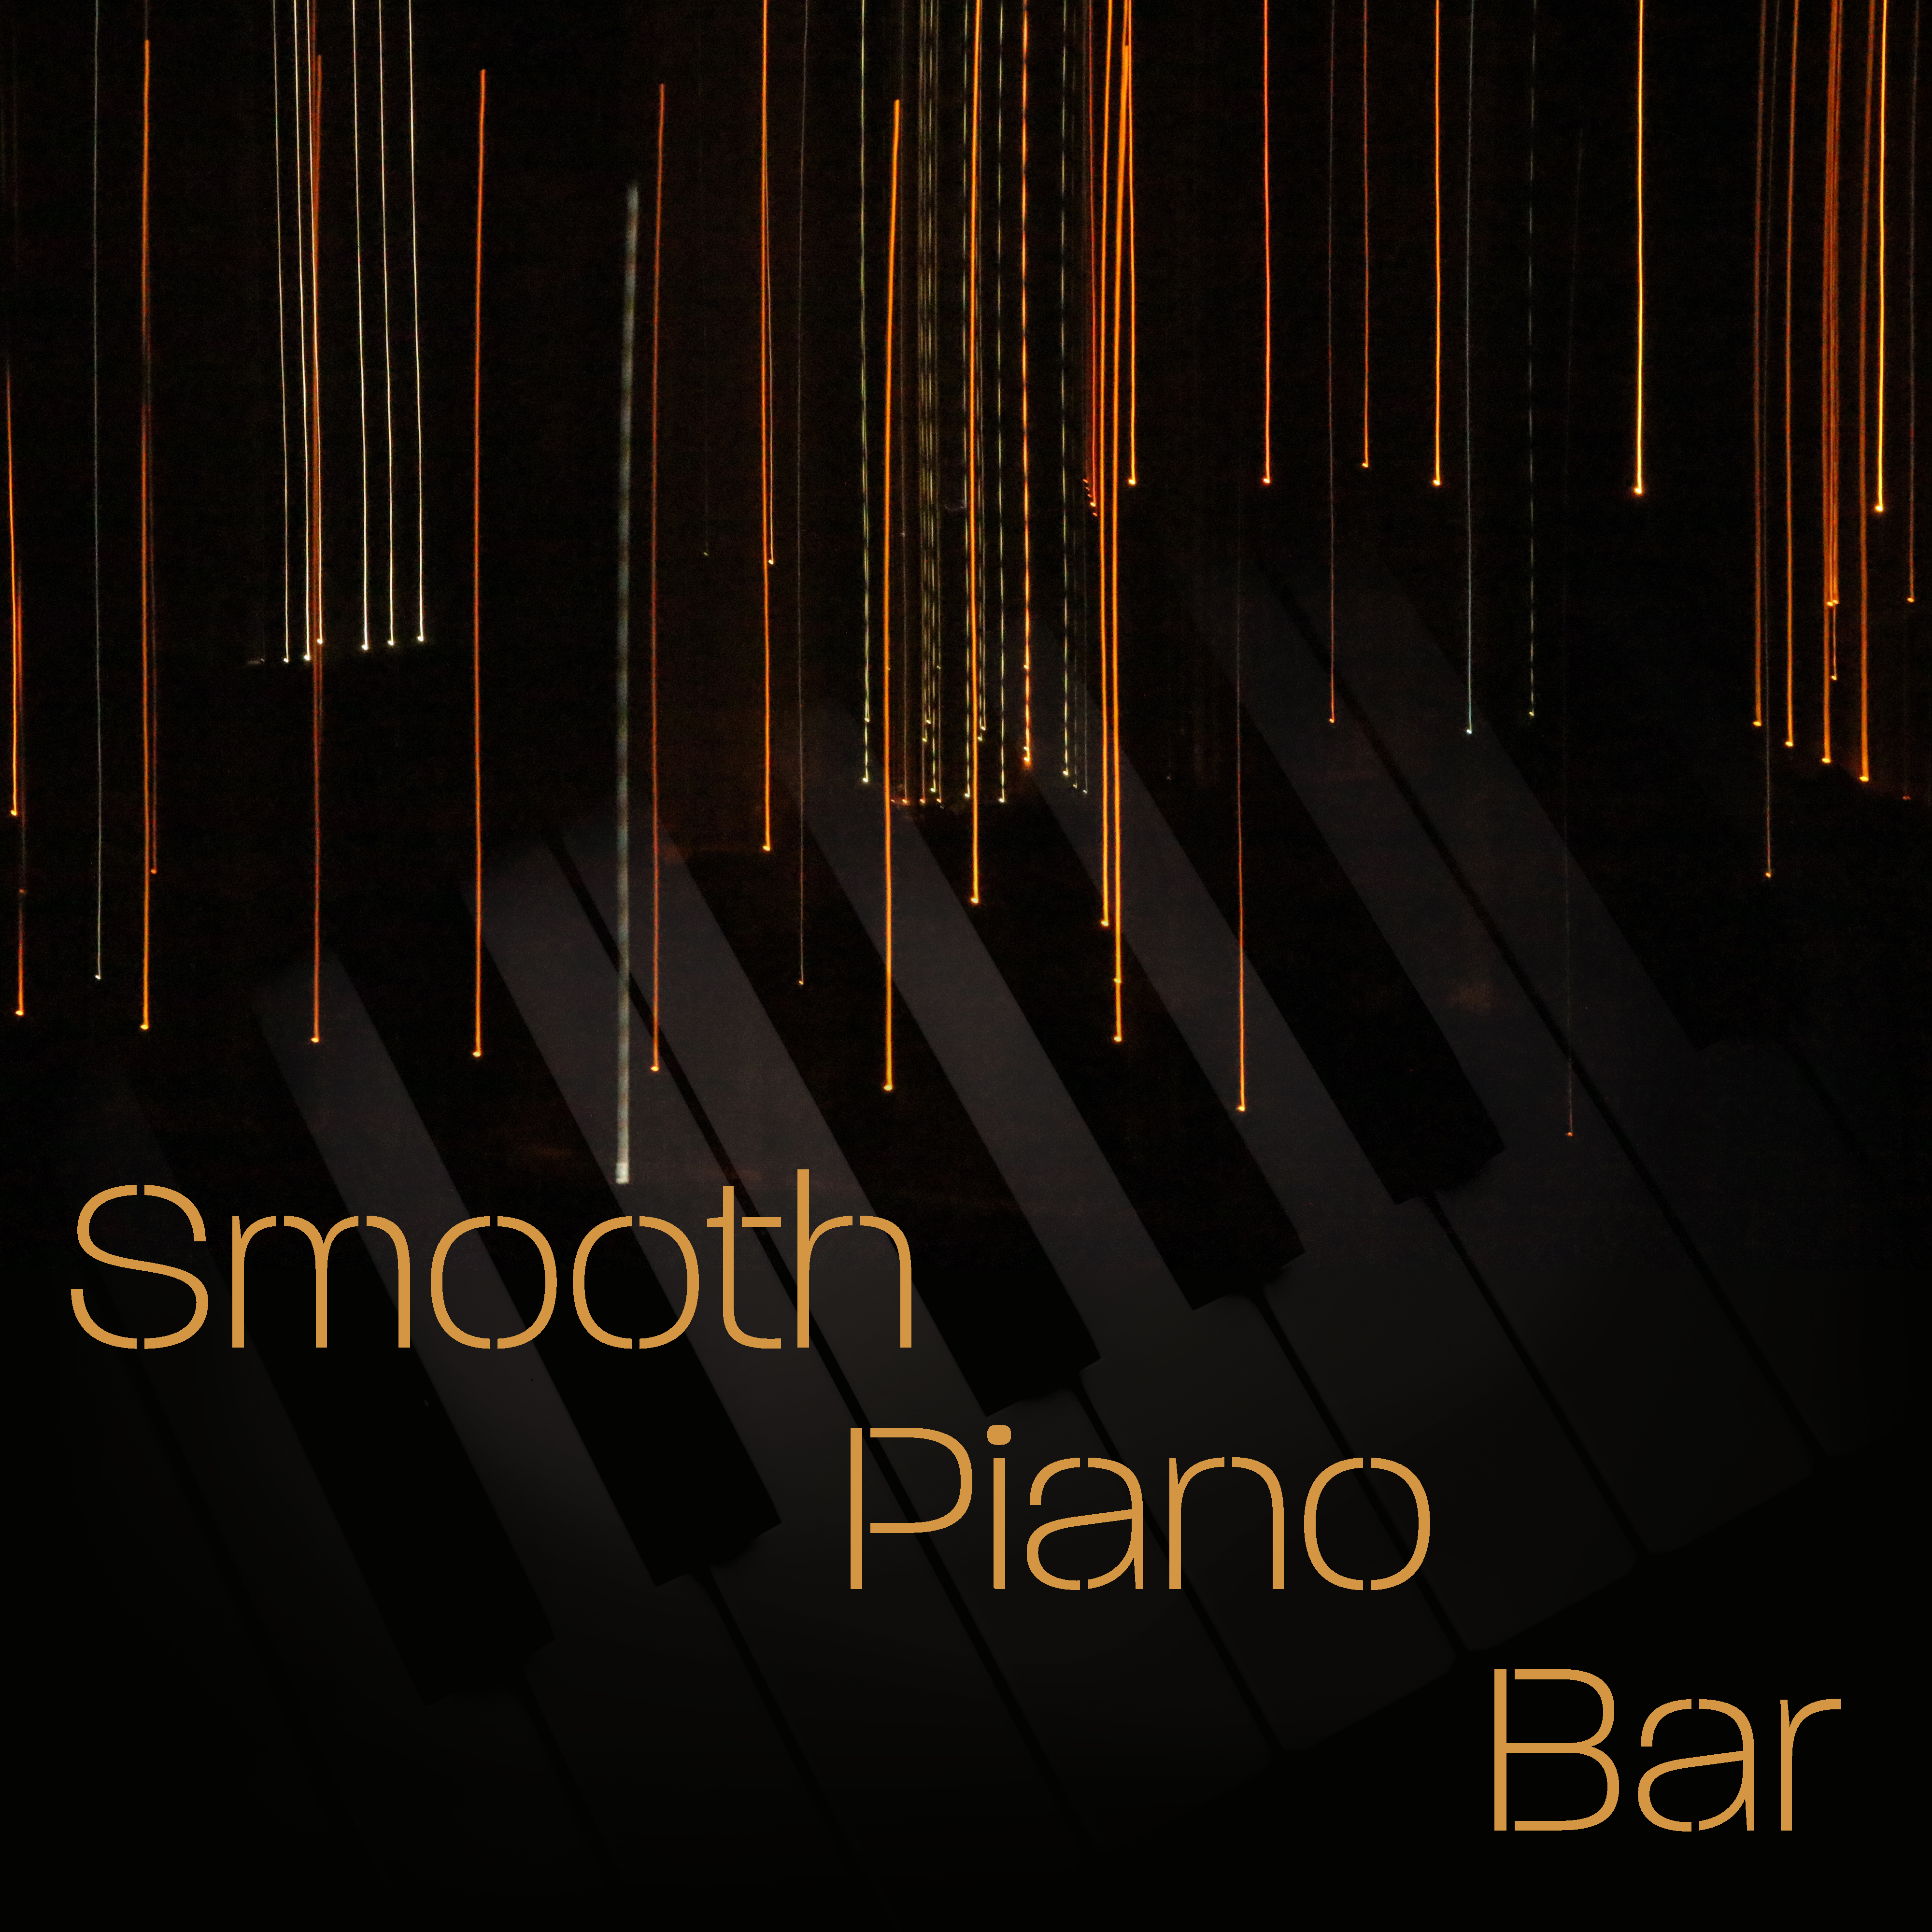 Smooth Piano Bar  Relaxed Jazz, Instrumental Music, Ambient Lounge, Piano Notes